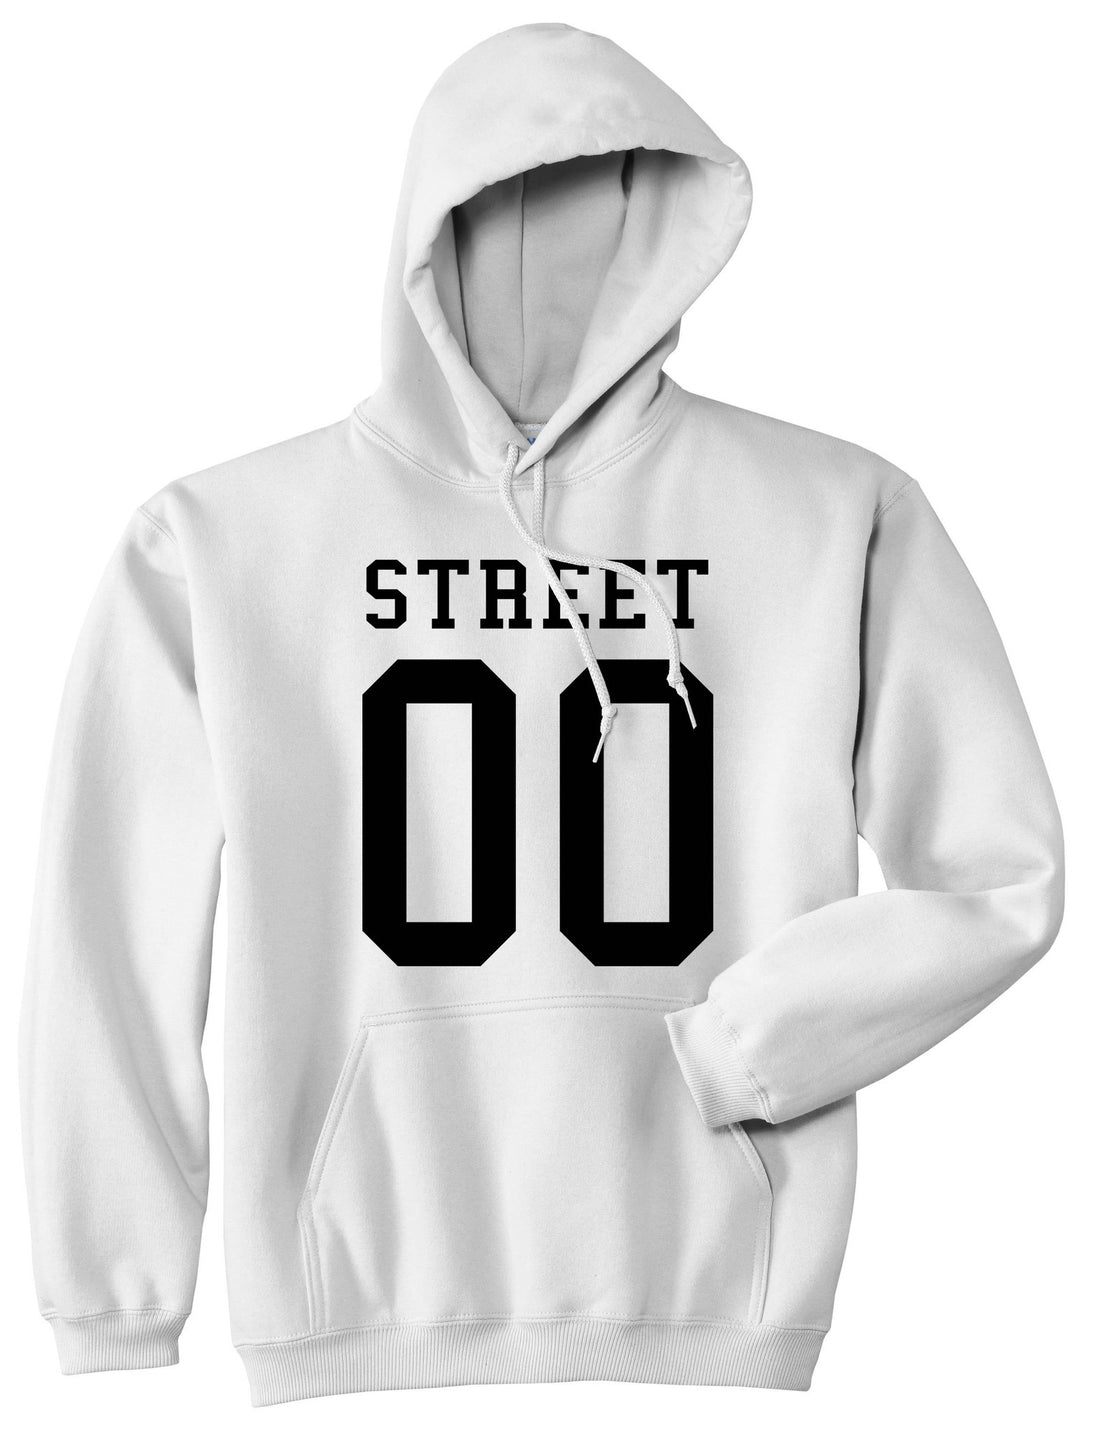 Street Team 00 Jersey Pullover Hoodie in White By Kings Of NY